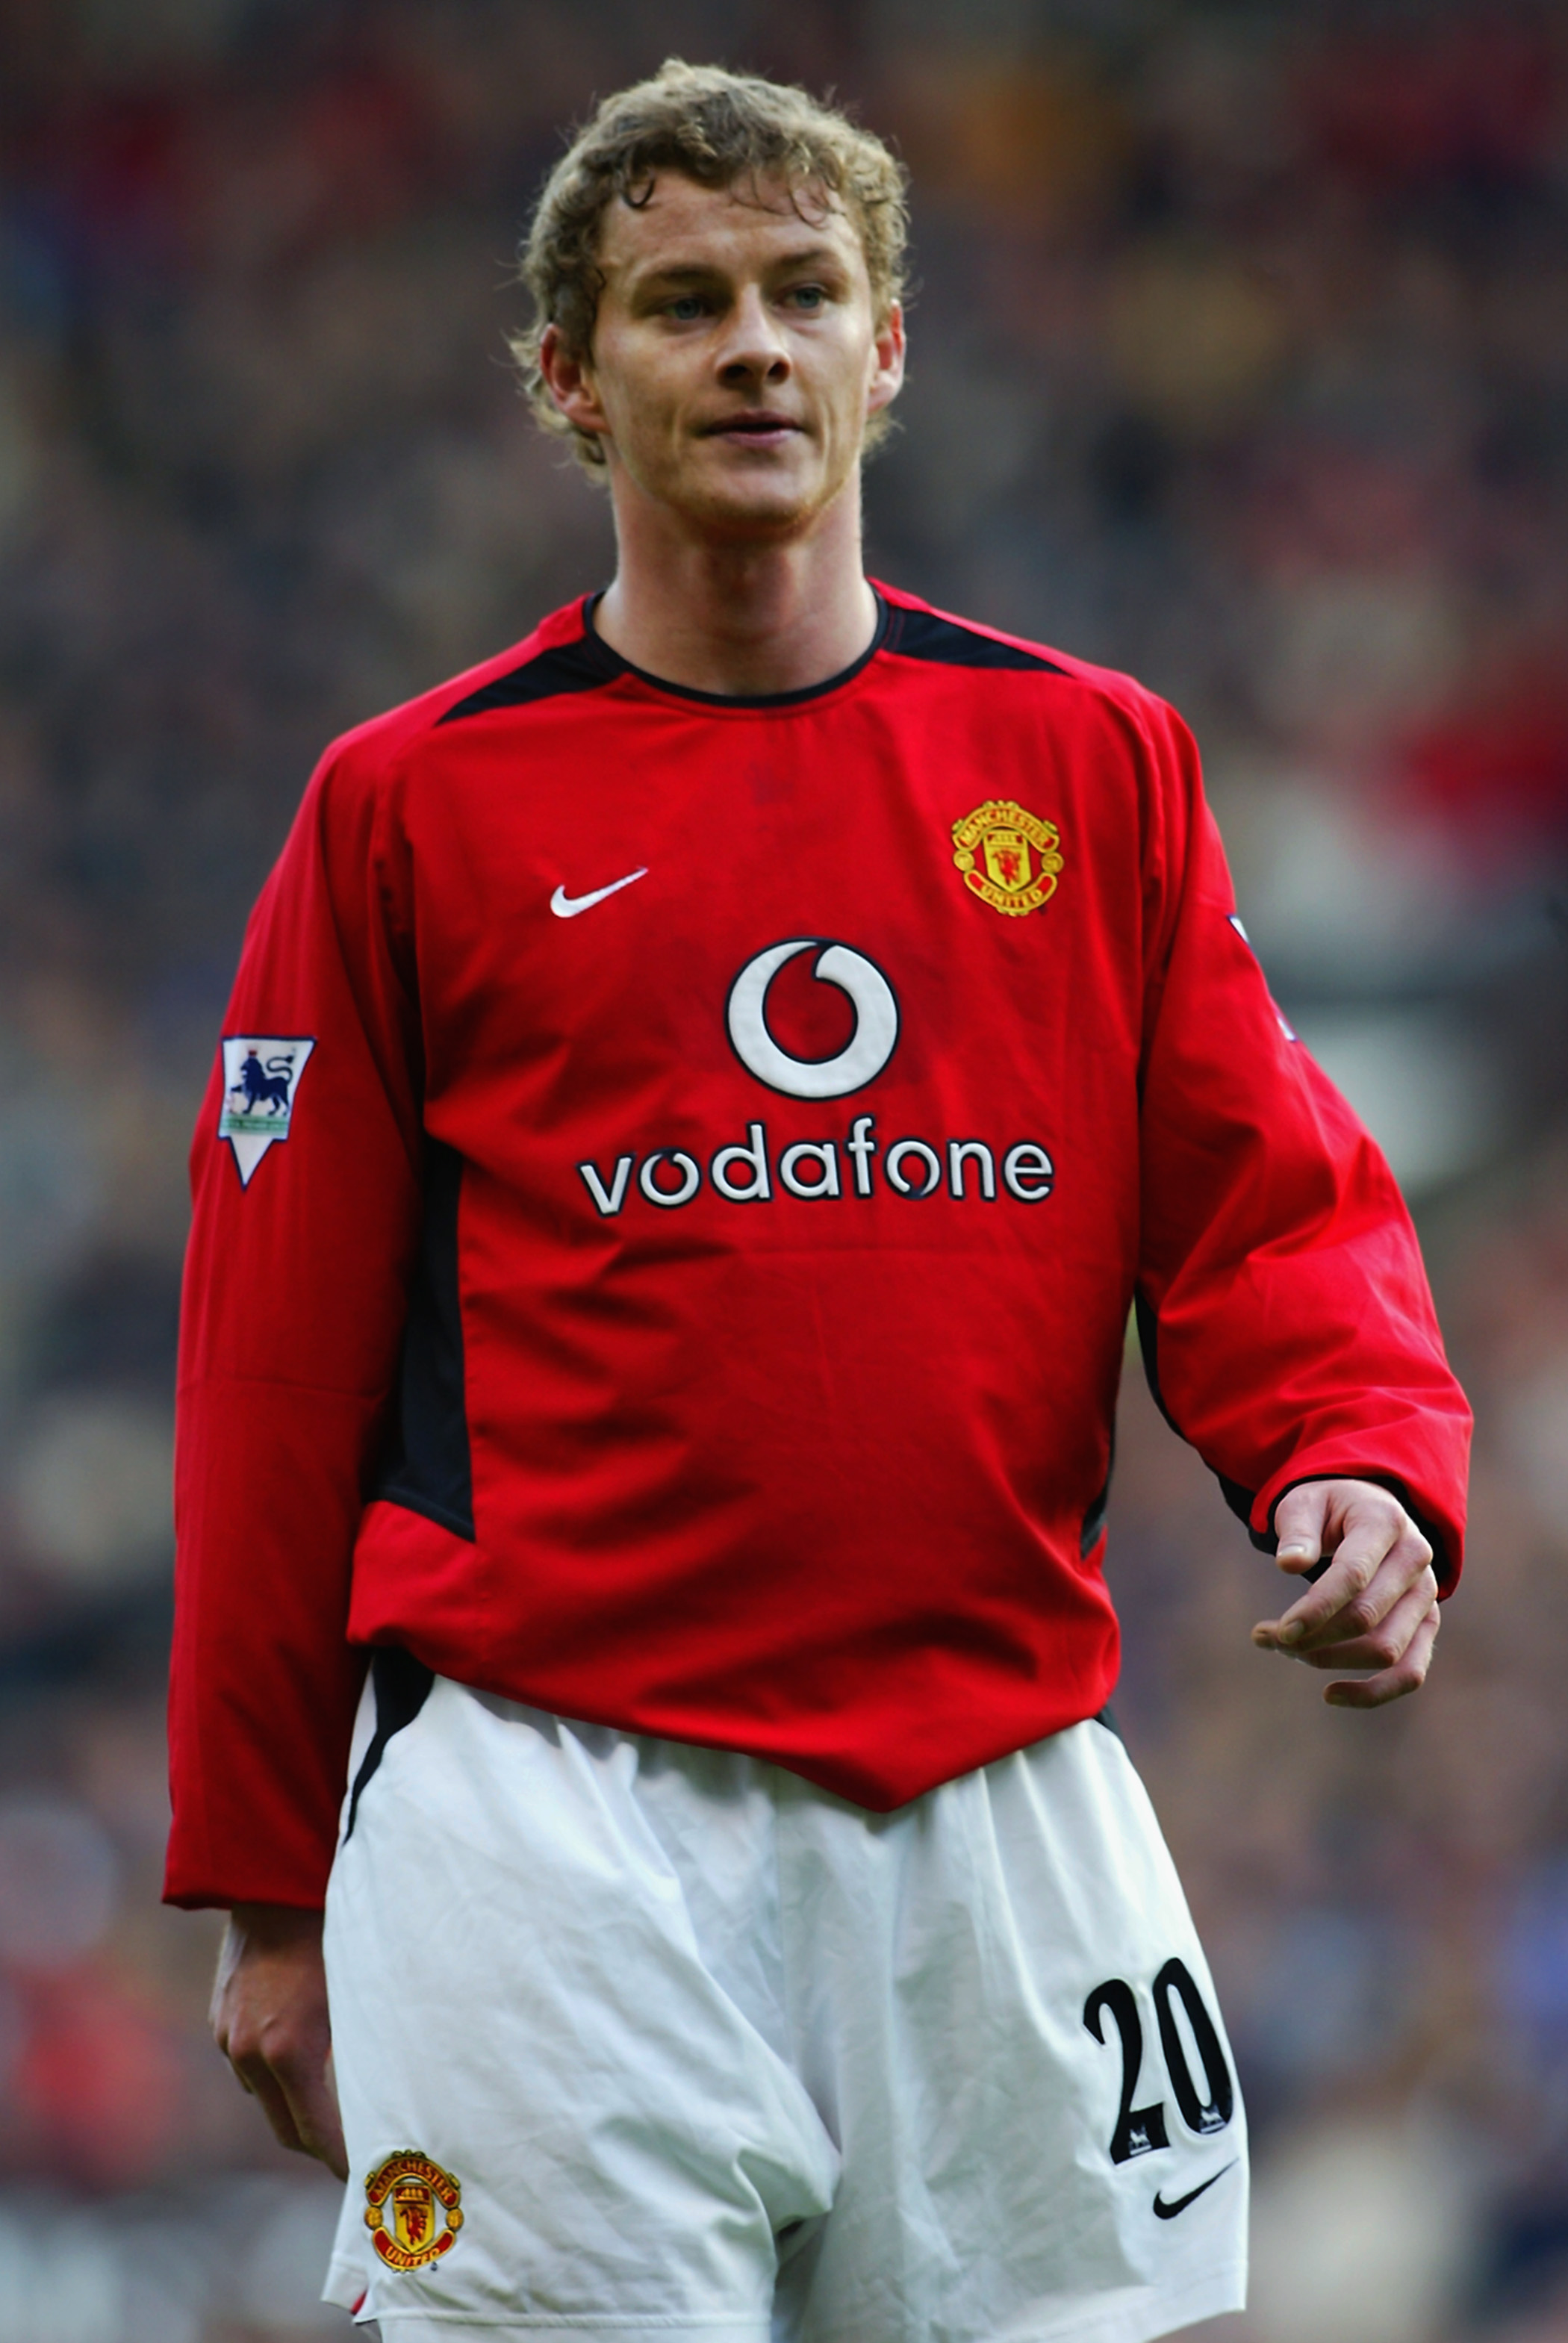 MANCHESTER - OCTOBER 26:  Ole Gunnar Solskjaer of Manchester United during the FA Barclaycard Premiership match on October 26, 2002 between Manchester United and Aston Villa at Old Trafford in Manchester. (Photo by Laurence Griffiths/Getty Images)